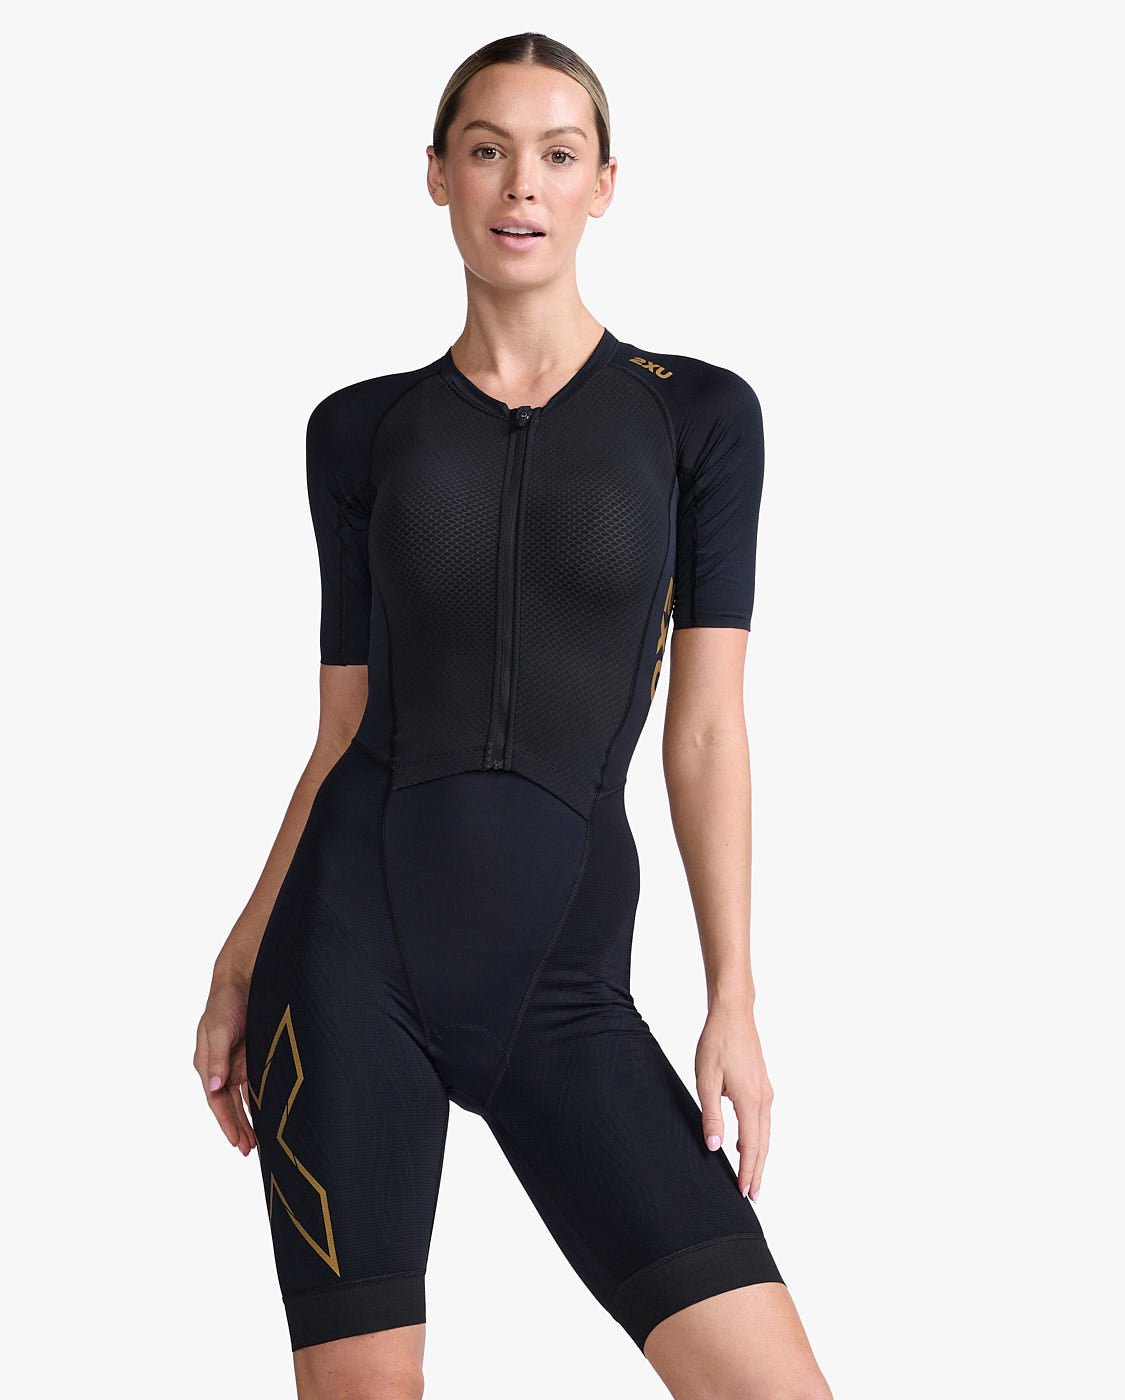 2XU South Africa - Womens Light Speed Sleeved Trisuit - Black/Gold